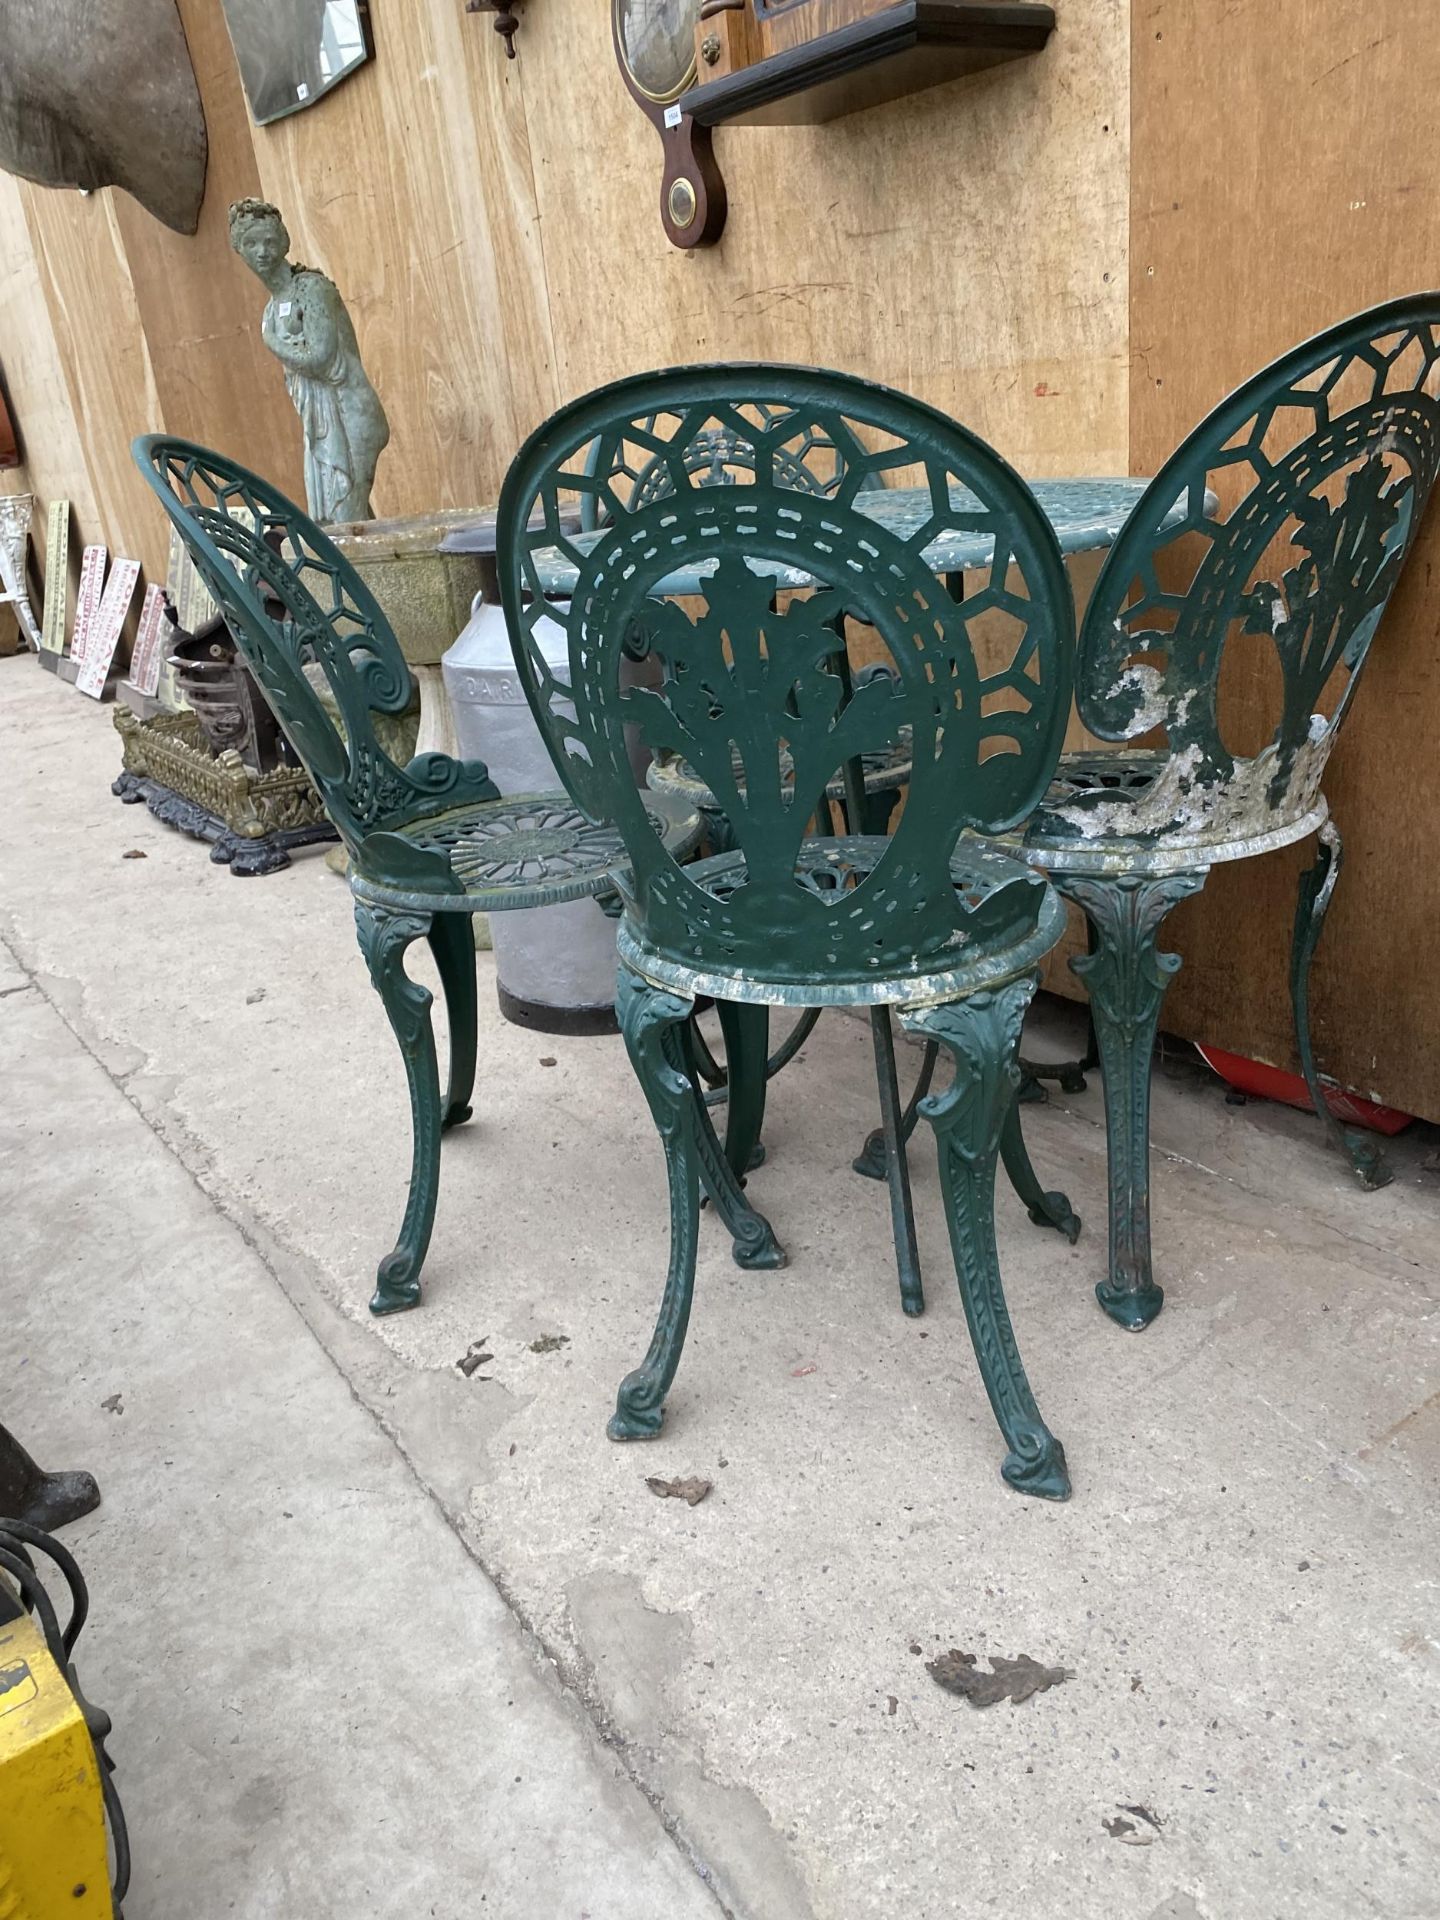 A VINTAGE CAST ALLOY BISTRO SET COMPRISING OF A ROUND TABLE AND FOUR CHAIRS - Image 2 of 2